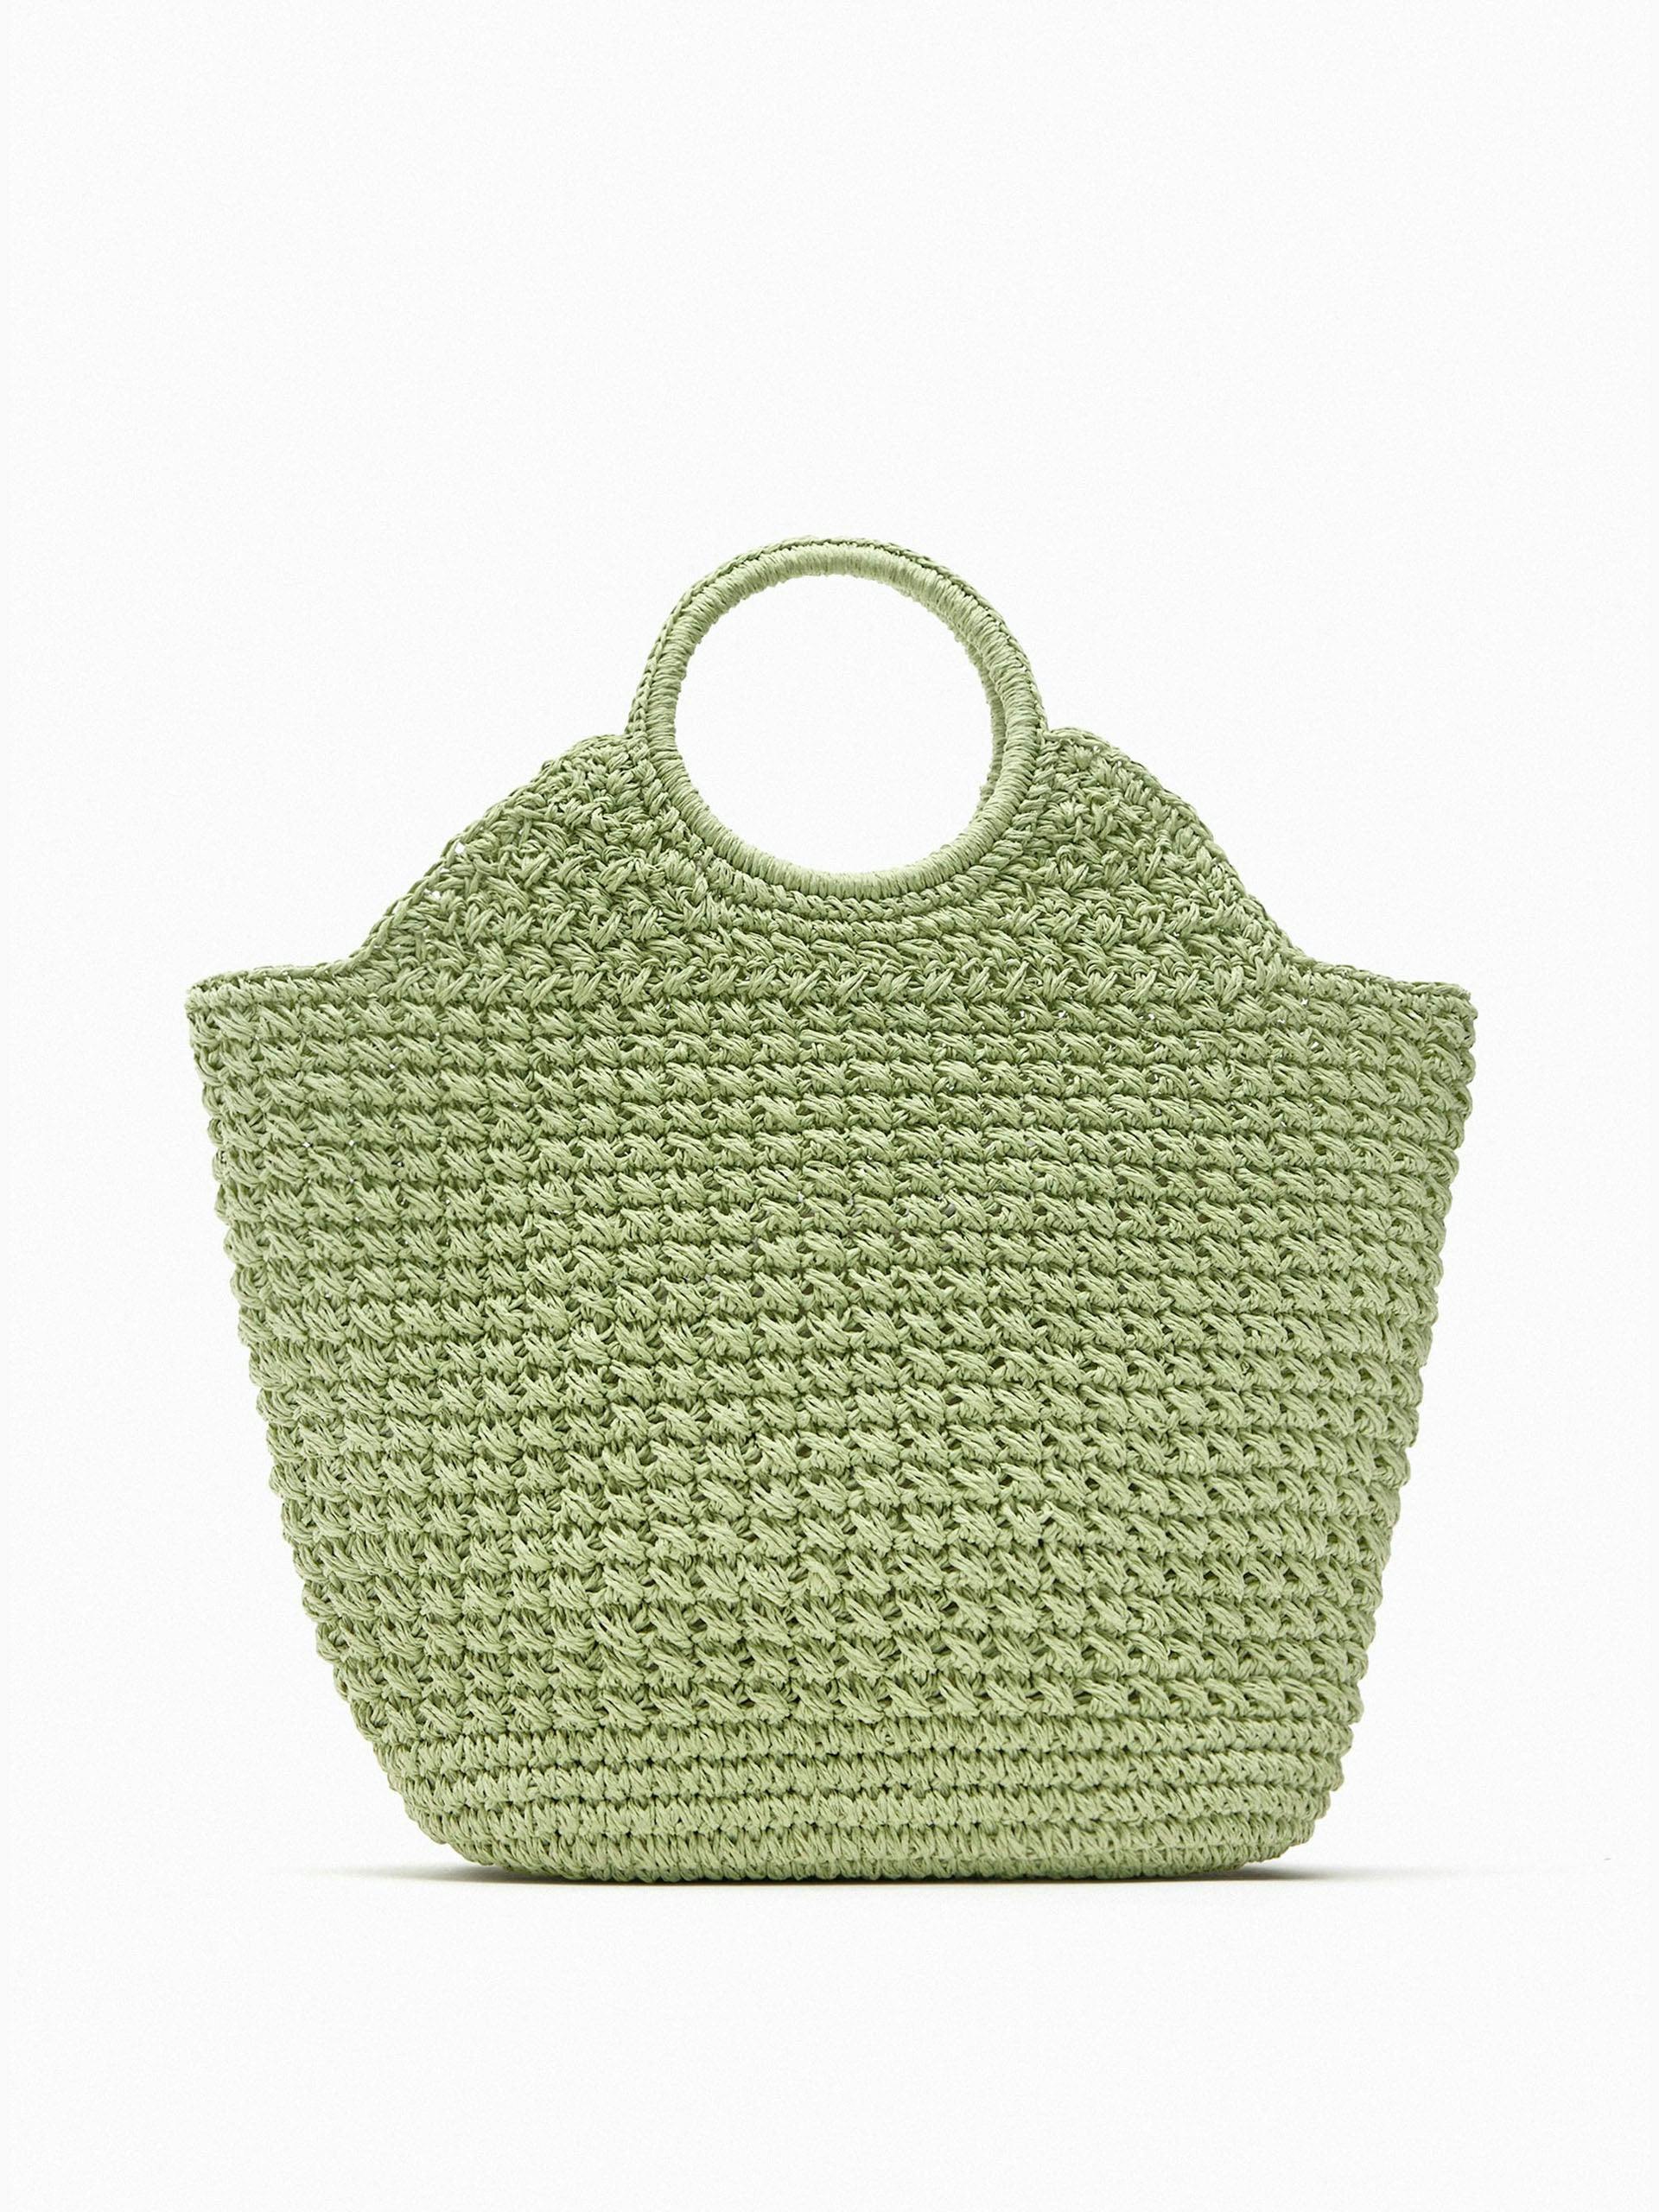 Green plaited tote bag